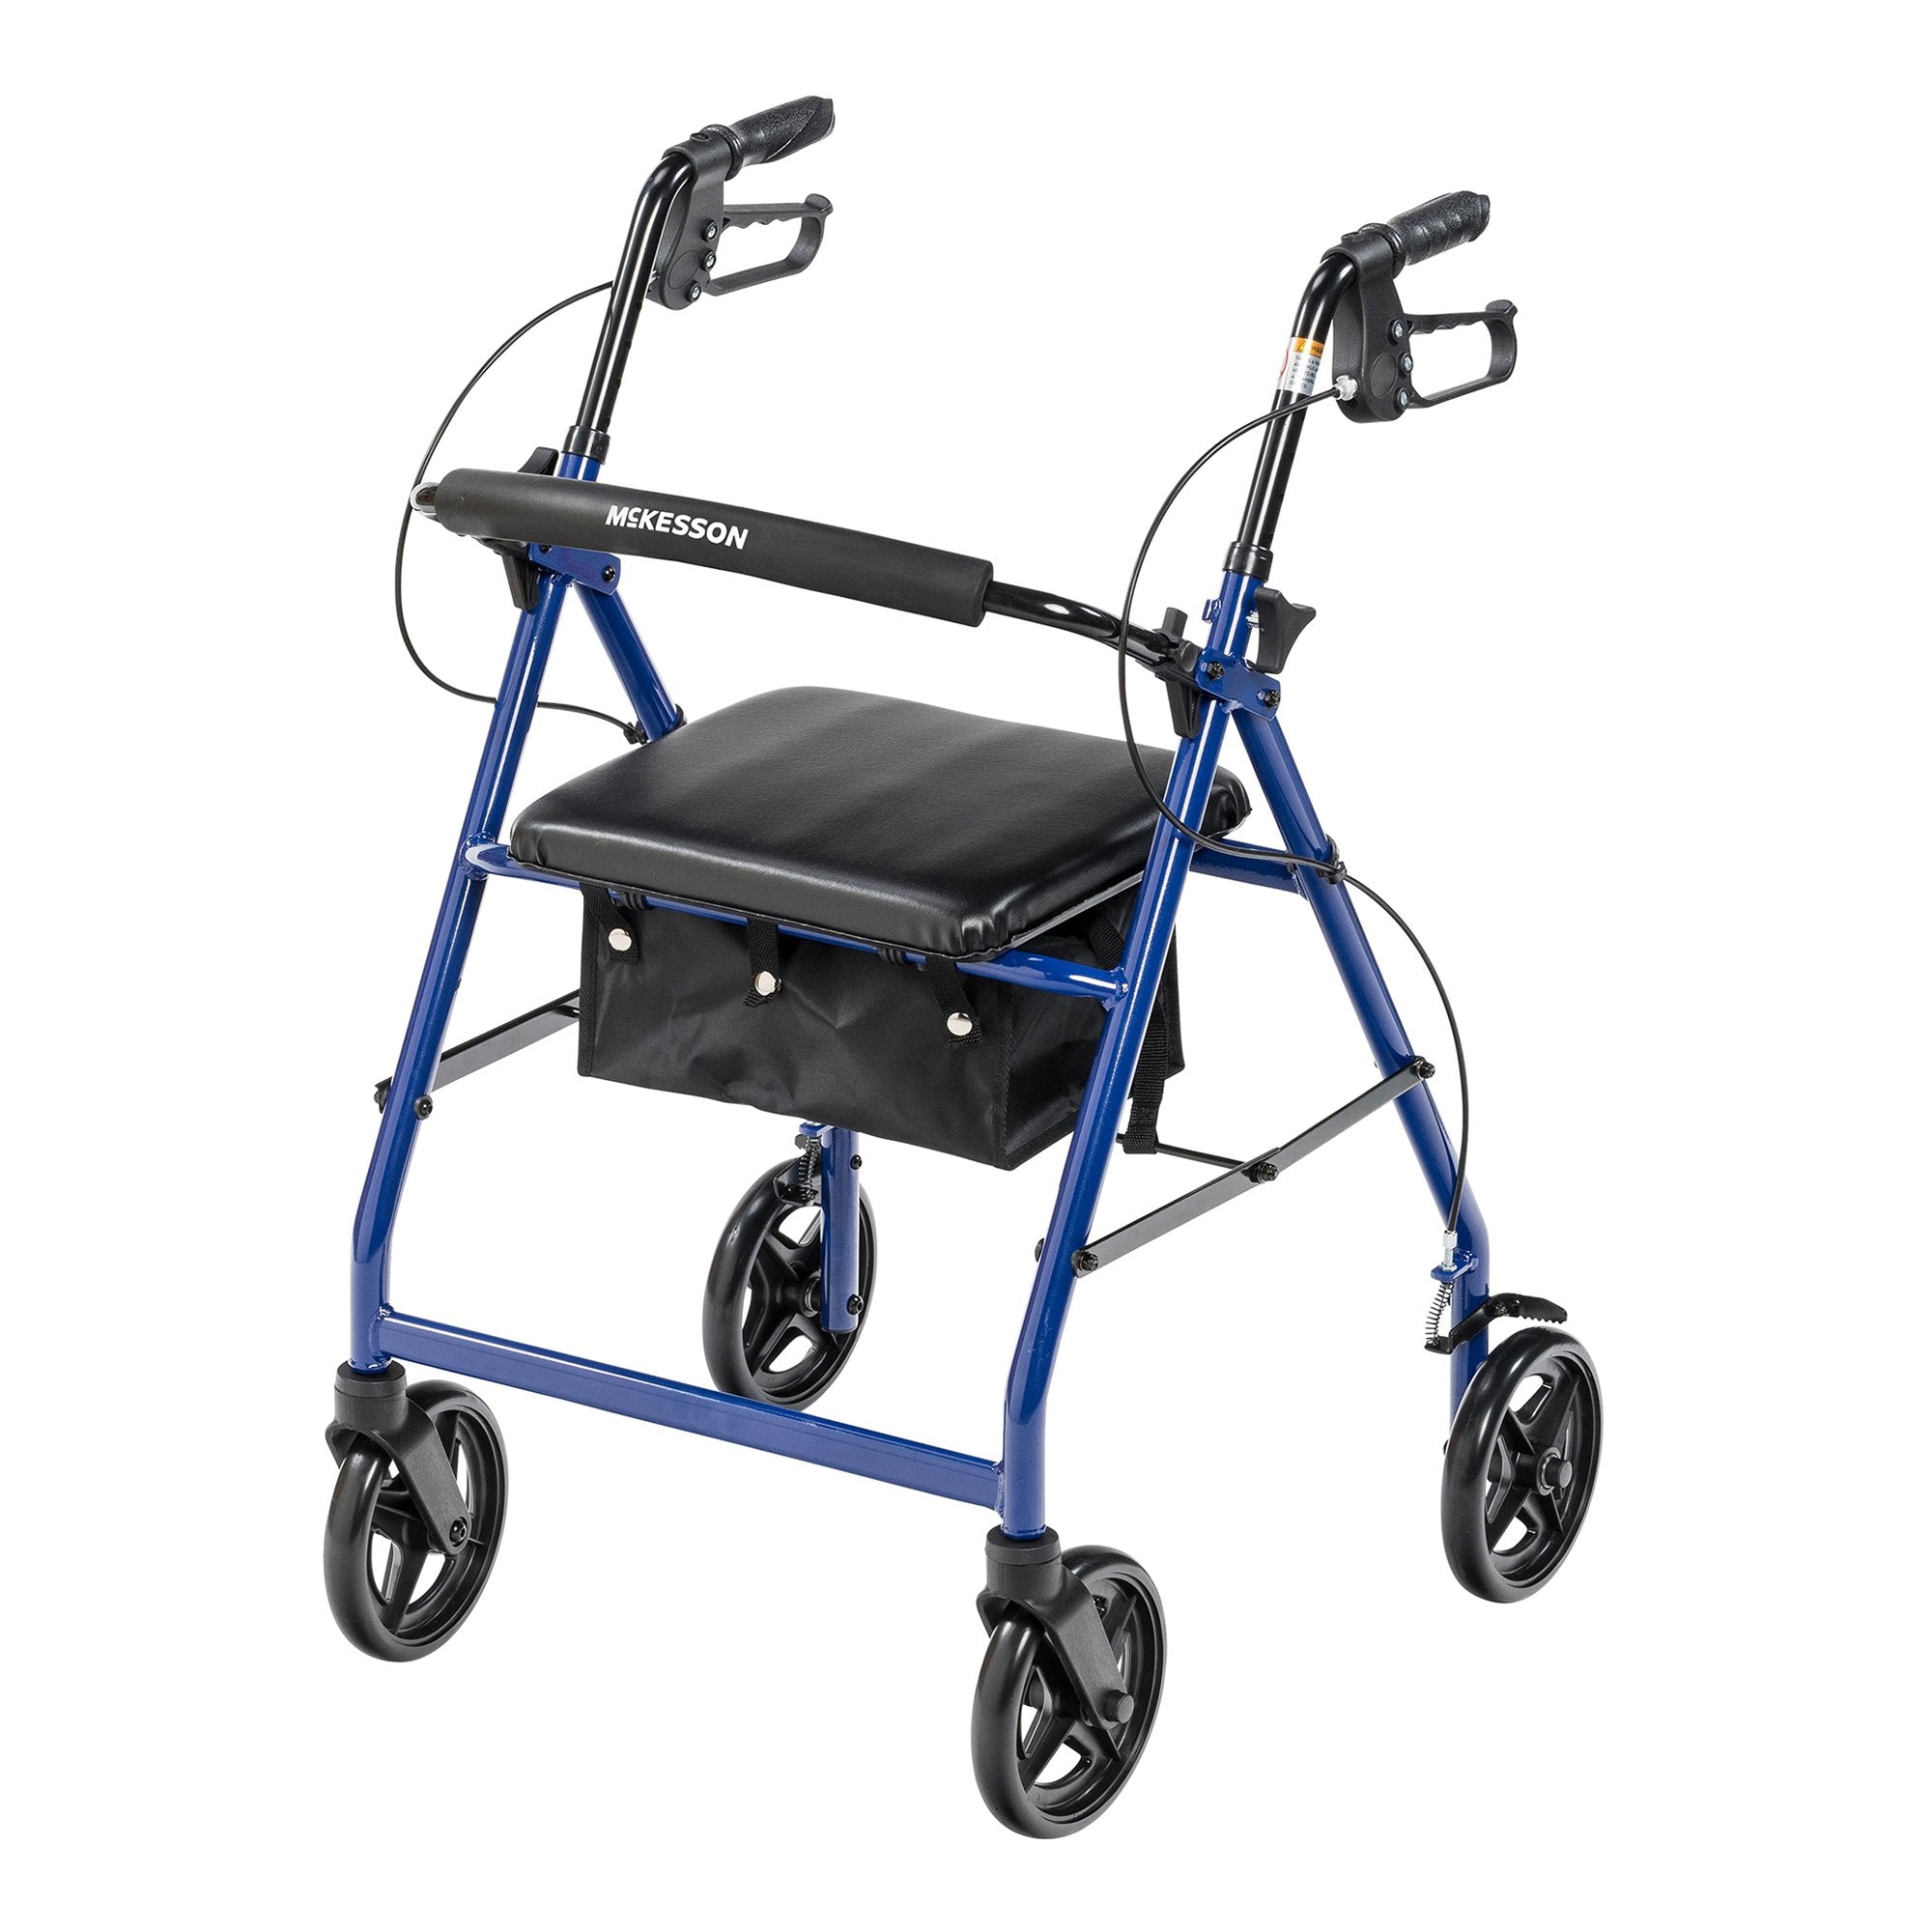 McKesson Blue Four-Wheel Rollator, 33 to 38 Inch Handle Height (1 Unit)